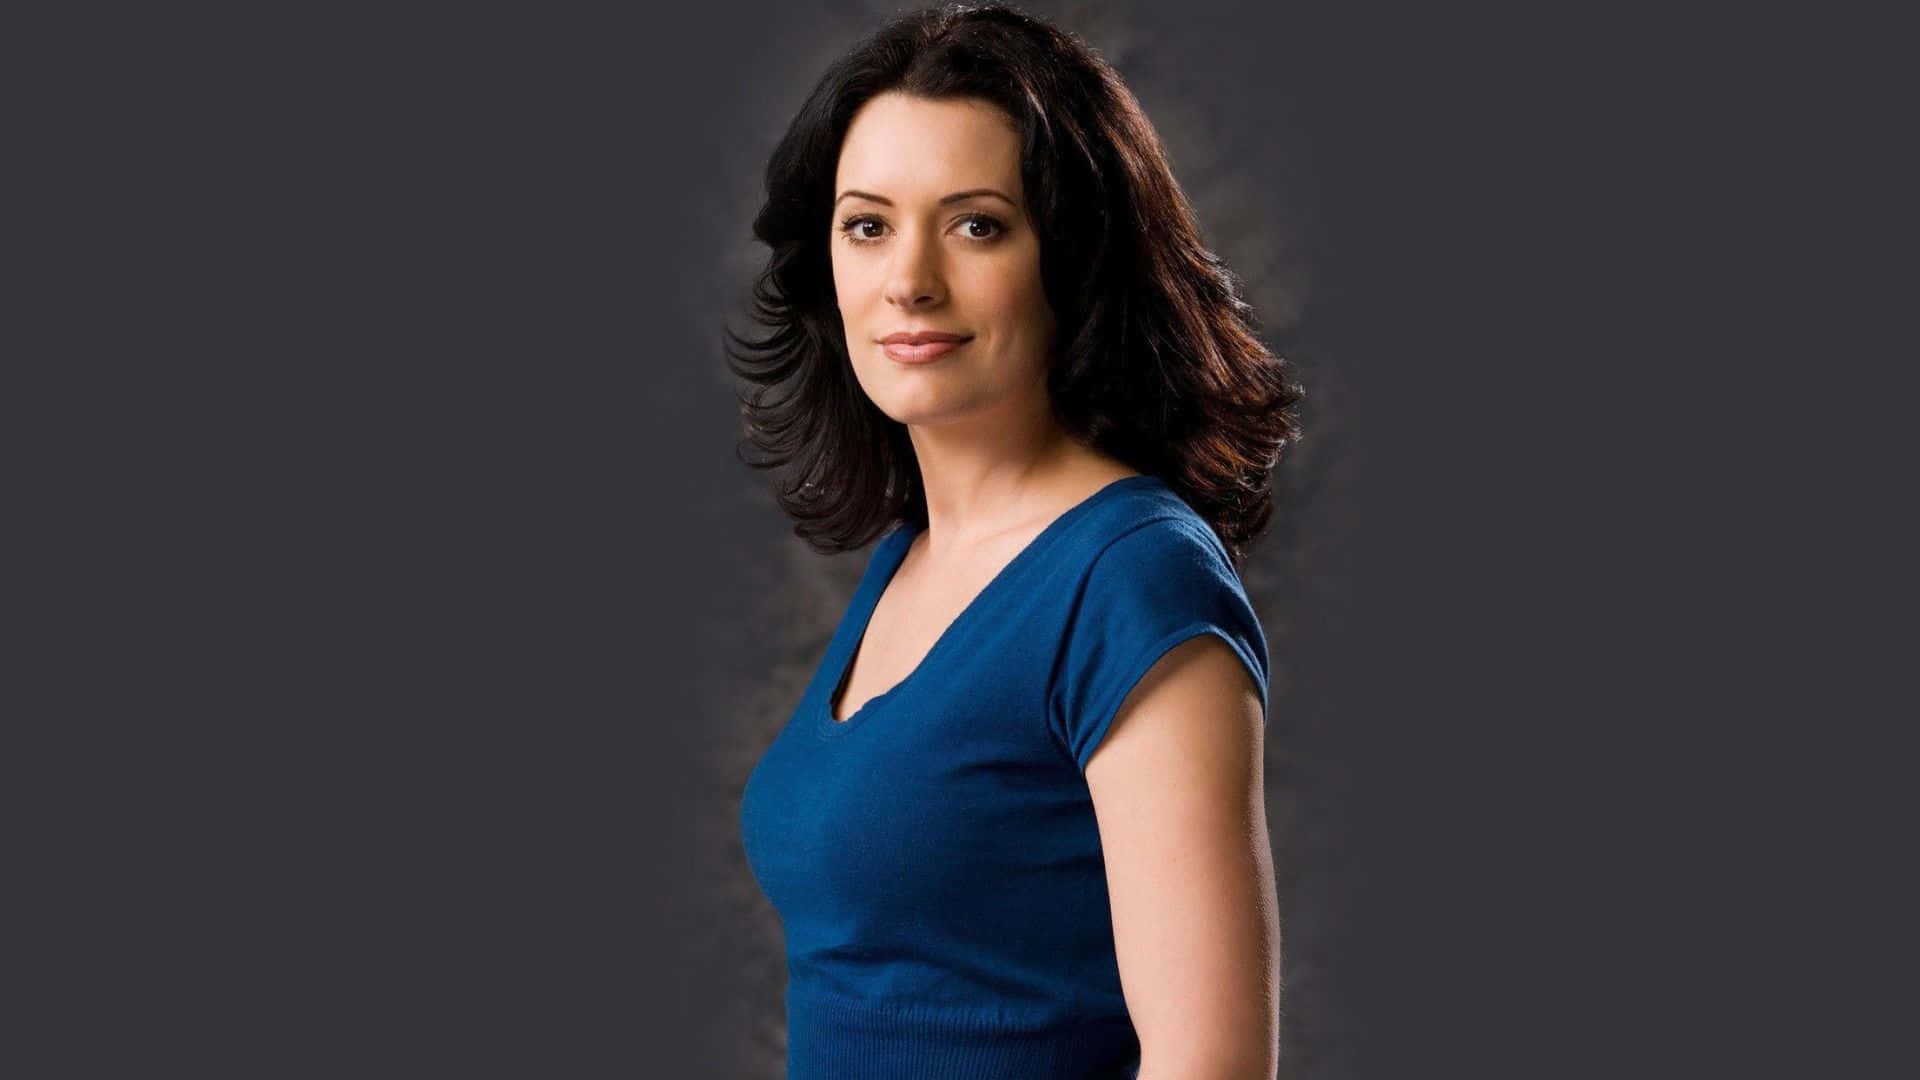 Paget Brewster striking a pose in a stunning photoshoot Wallpaper